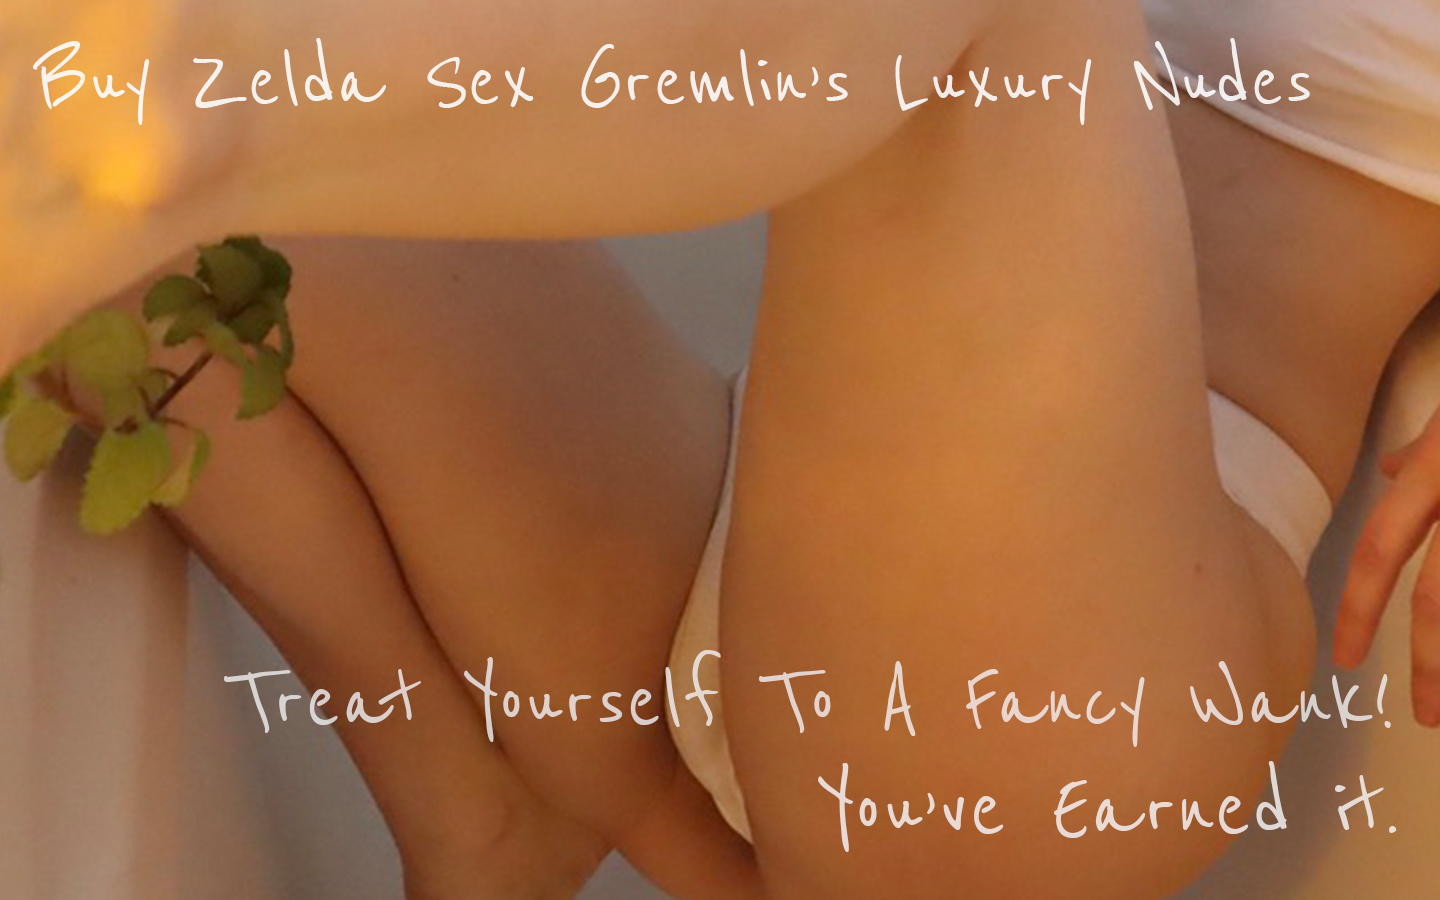 an ad for digital content showing a close-up of Zelda, wearing white panties